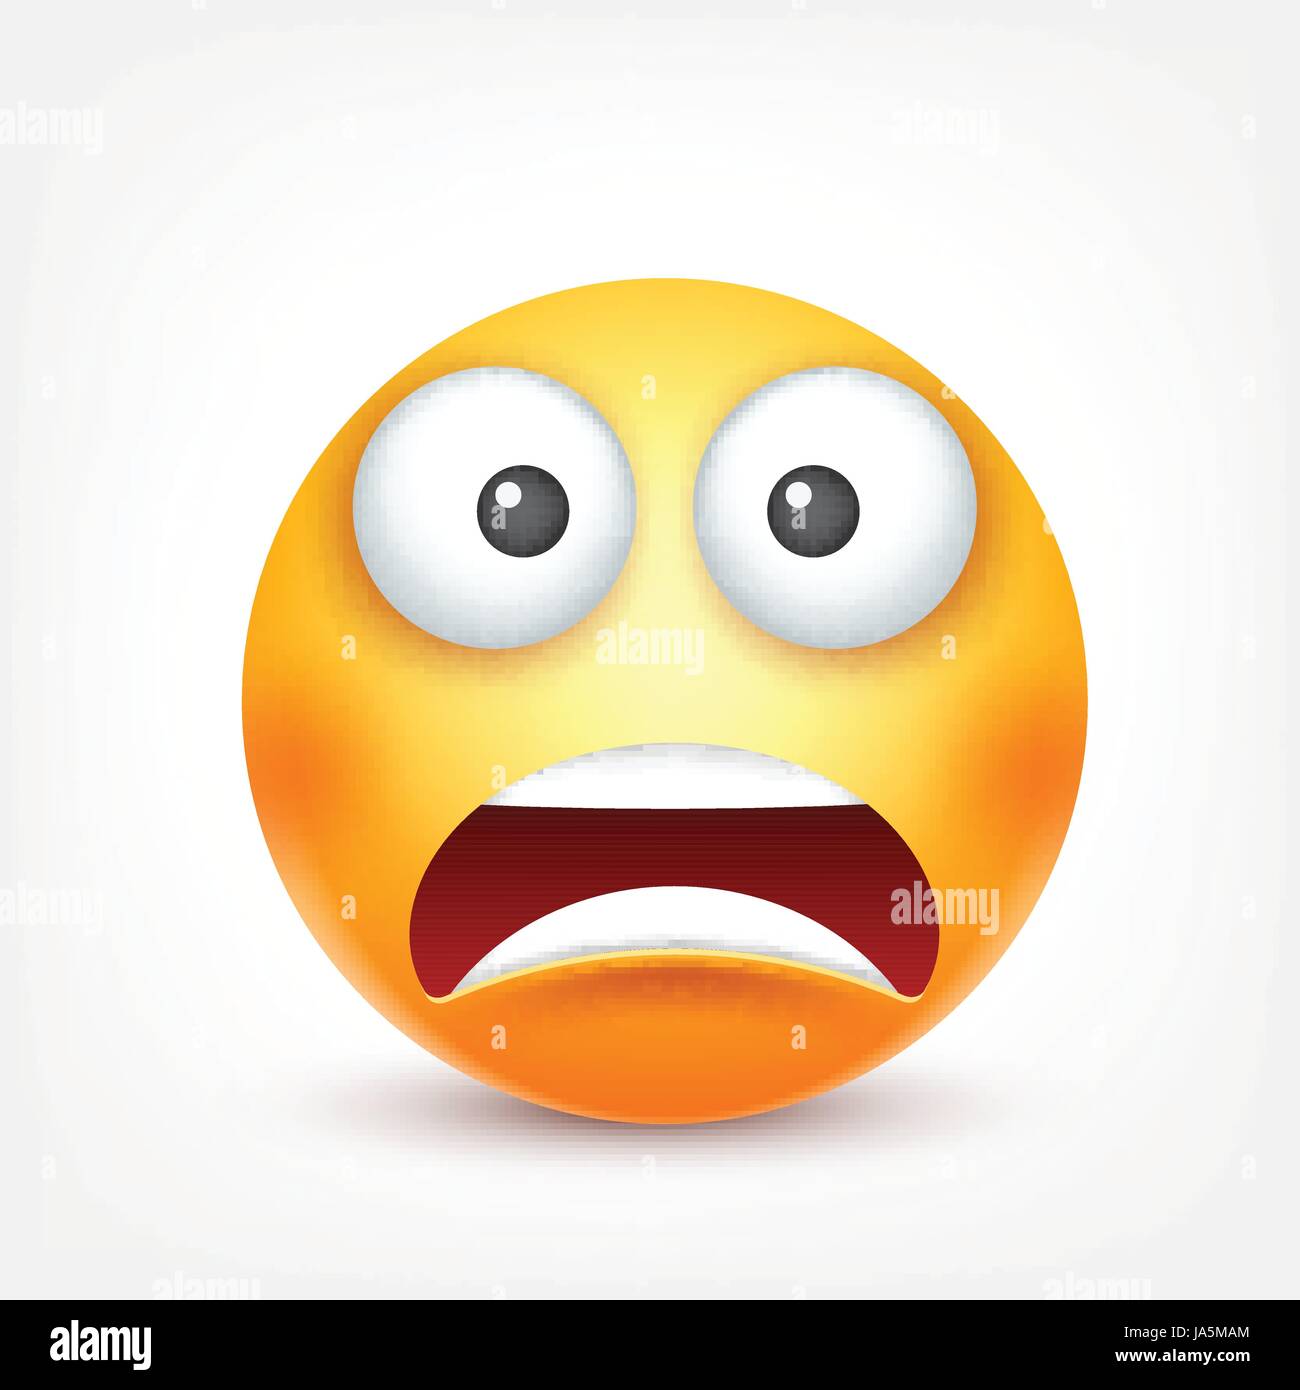 3D Animated Emoticons, Smiley animated